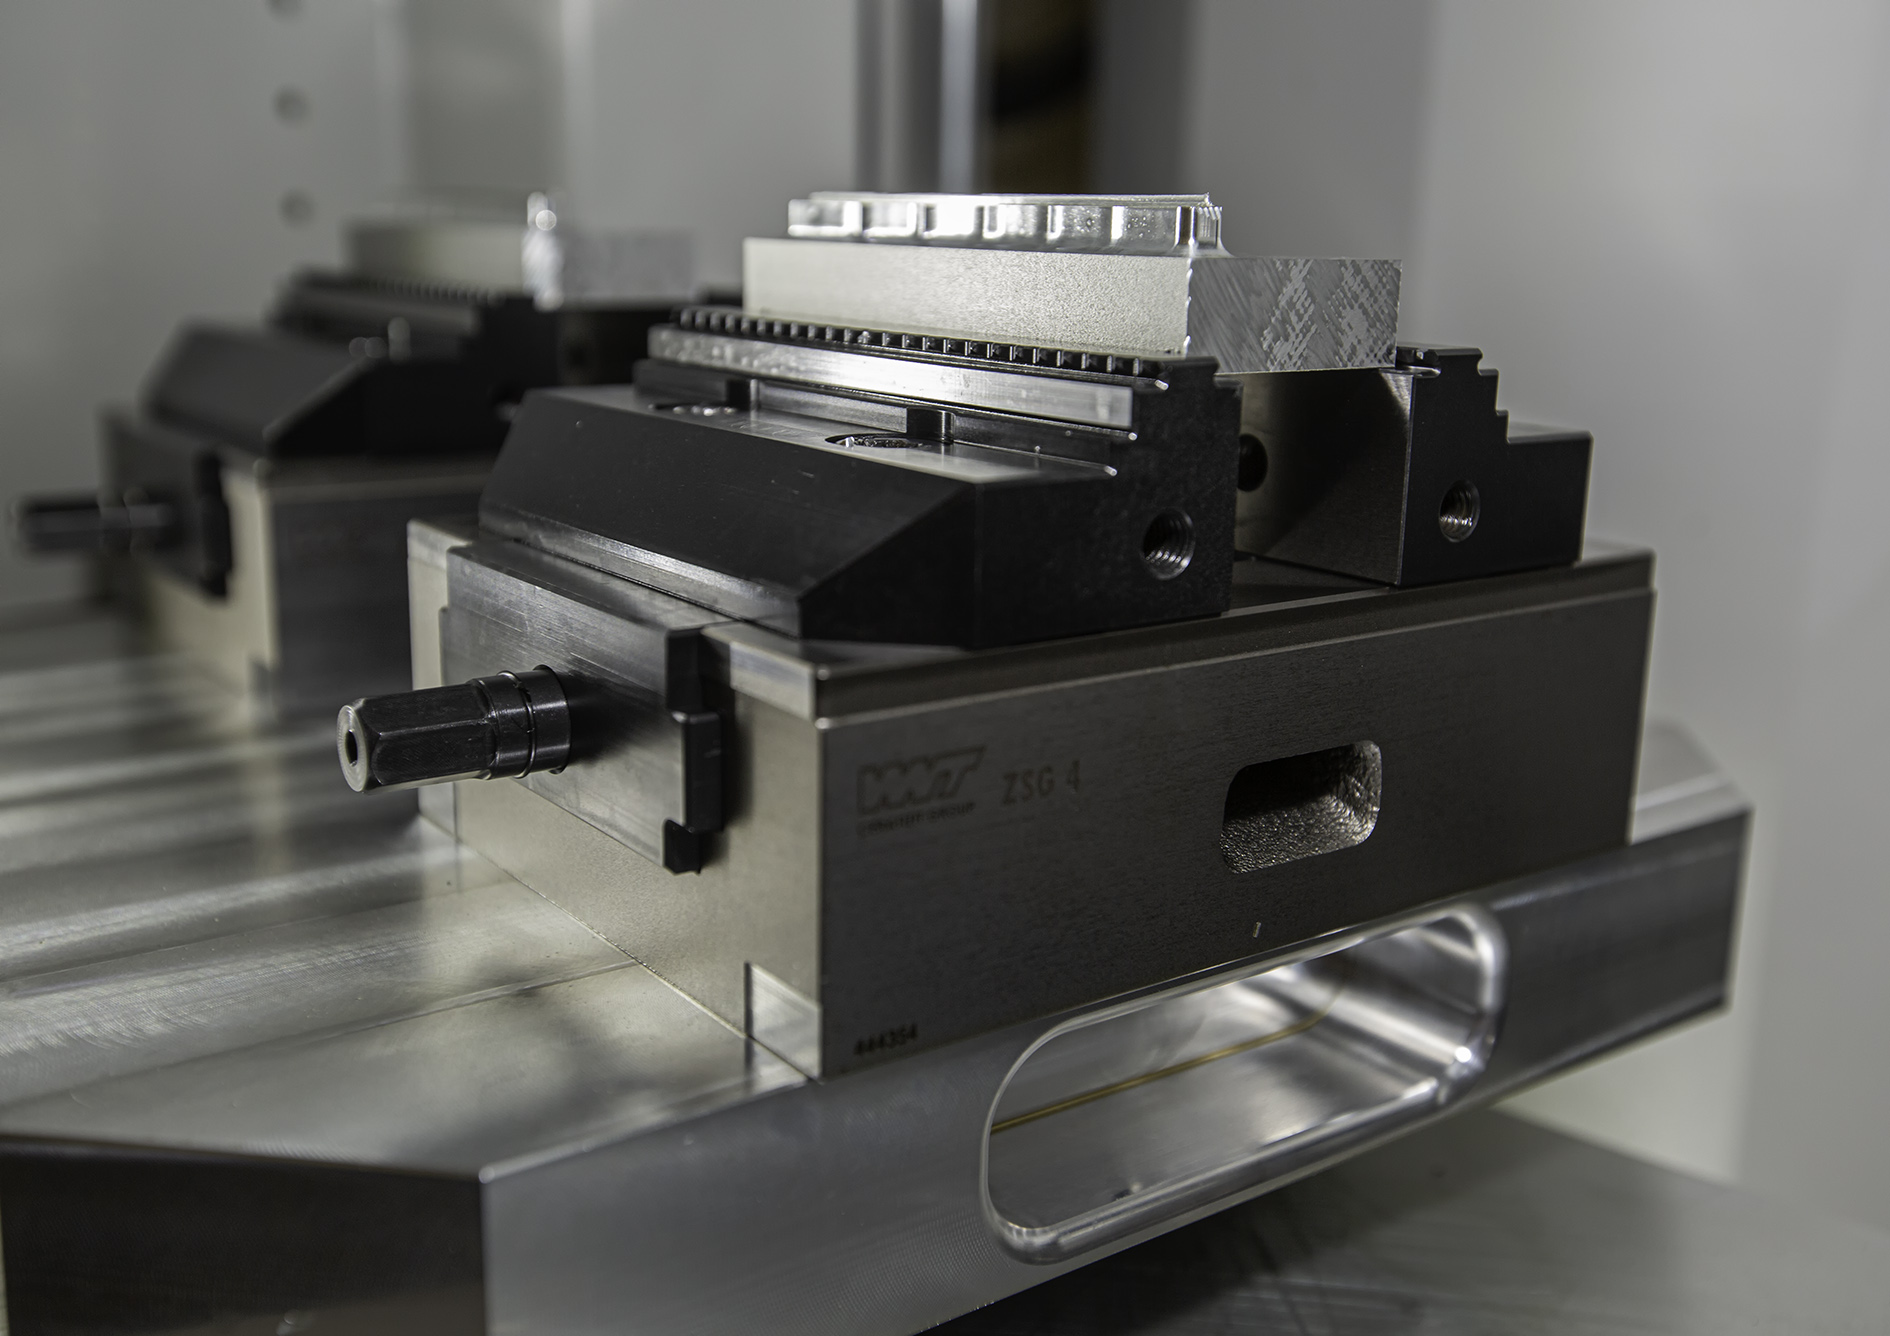  Driven to succeed – with a little help from Ceratizit workholding